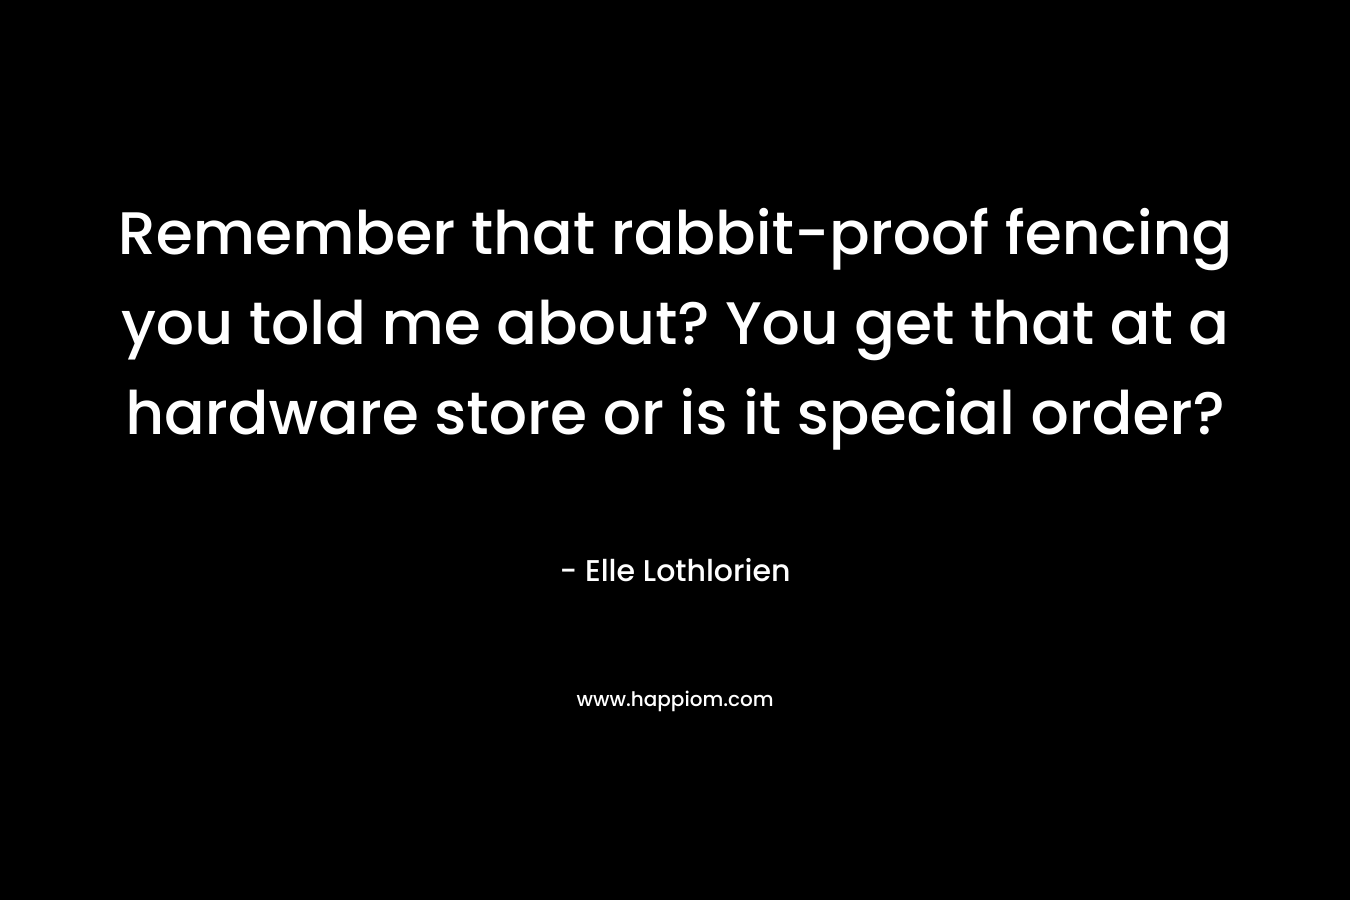 Remember that rabbit-proof fencing you told me about? You get that at a hardware store or is it special order? – Elle Lothlorien